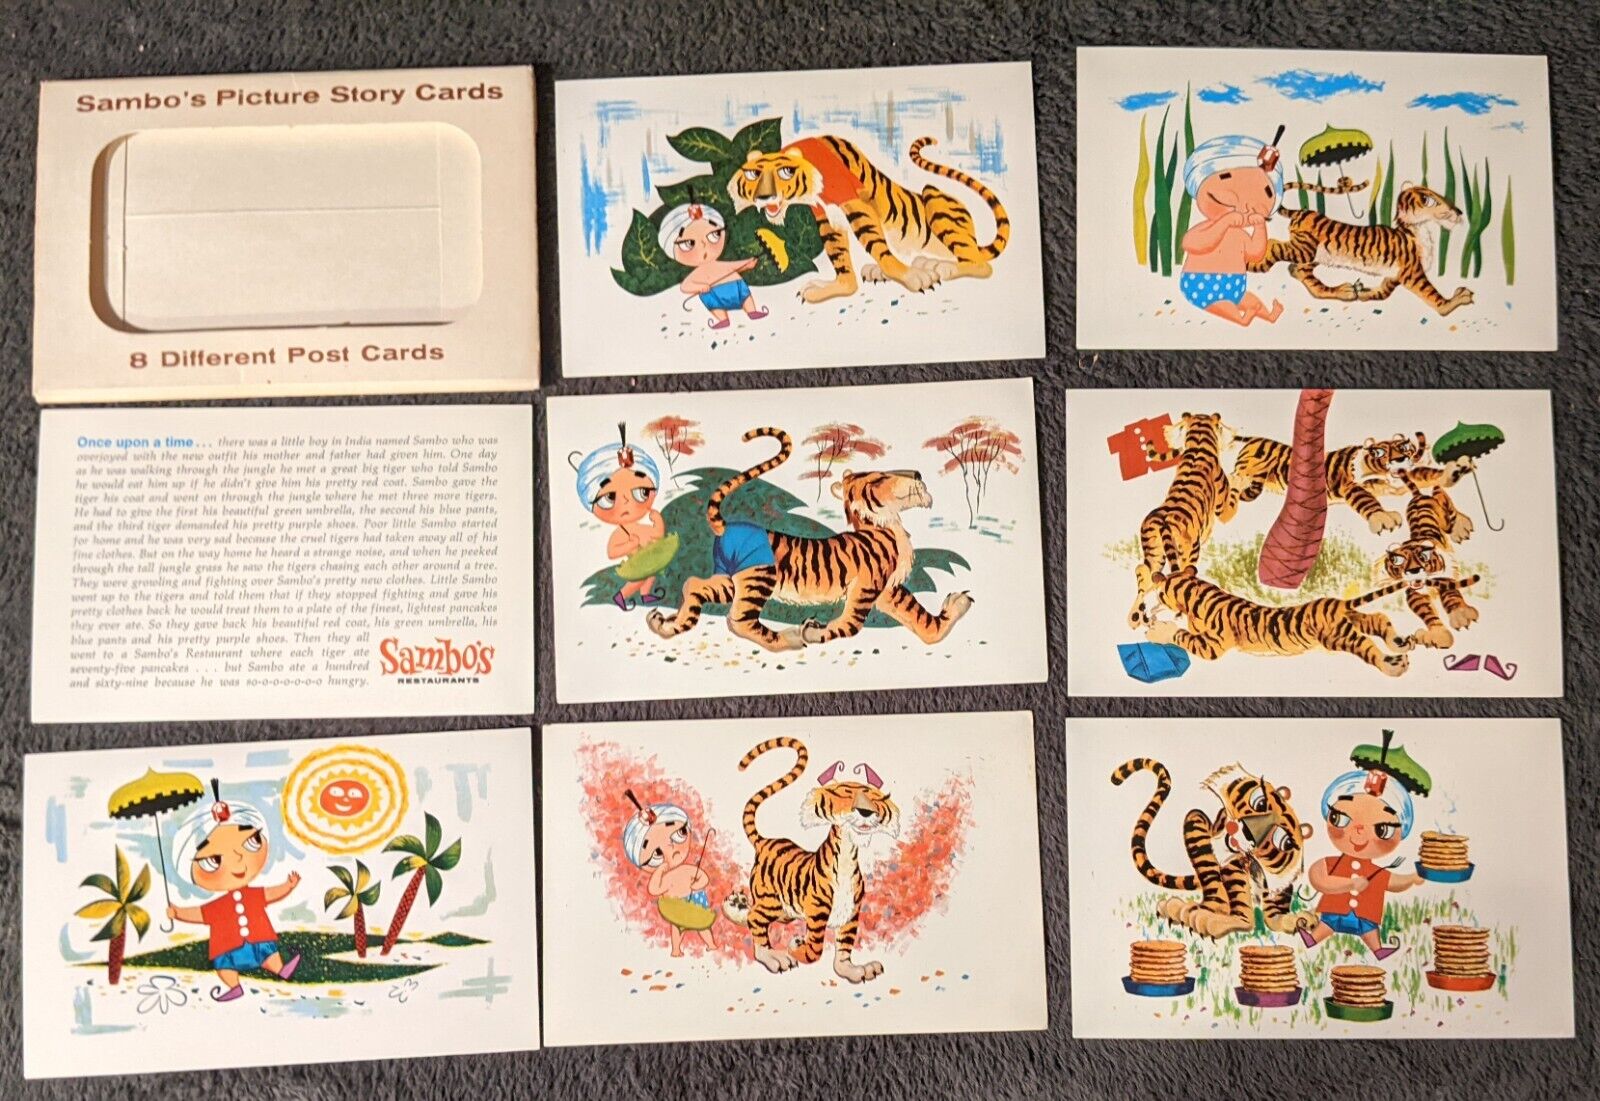 Sambo's Restaurant Vintage Picture Story Ad Printed Lot 8 Postcards Complete Set